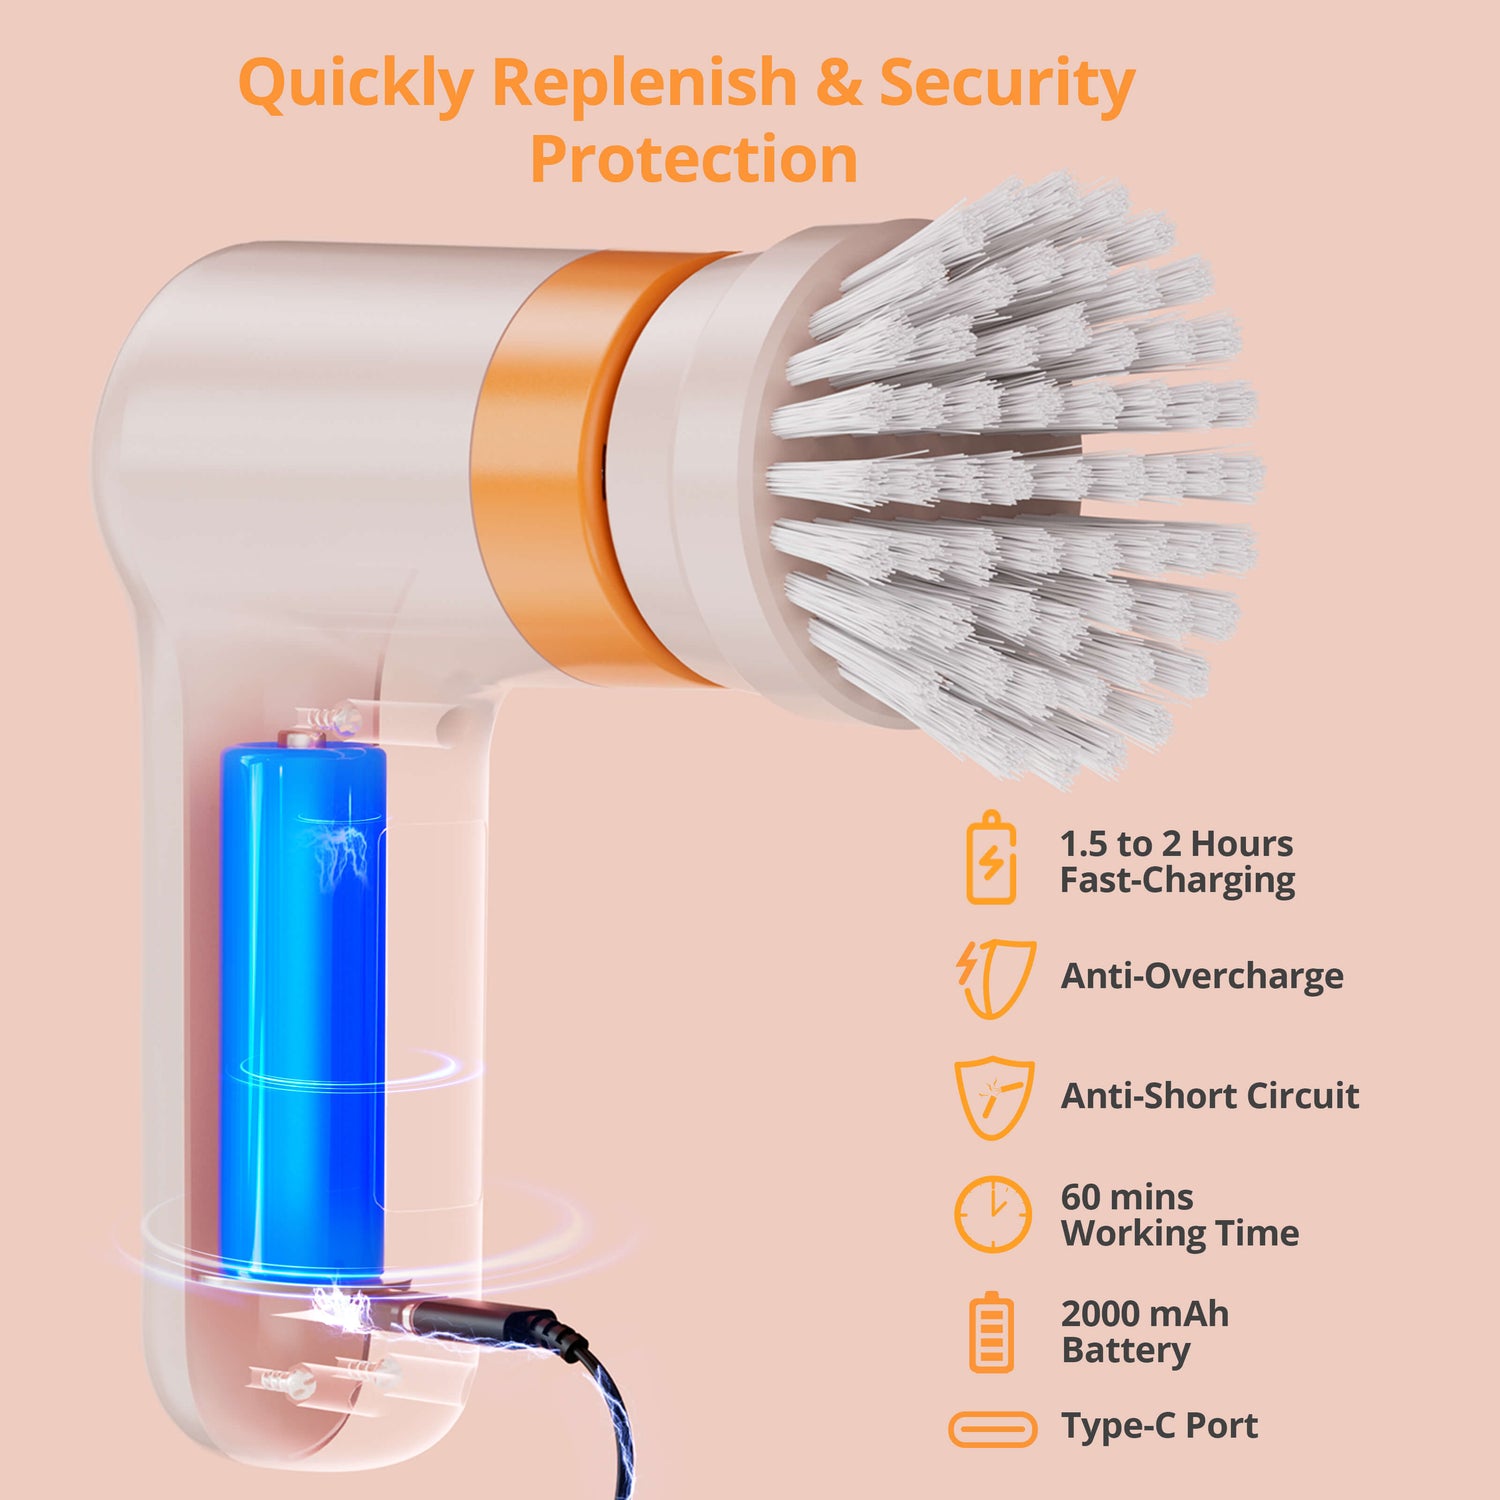 quickly replenish and security protection